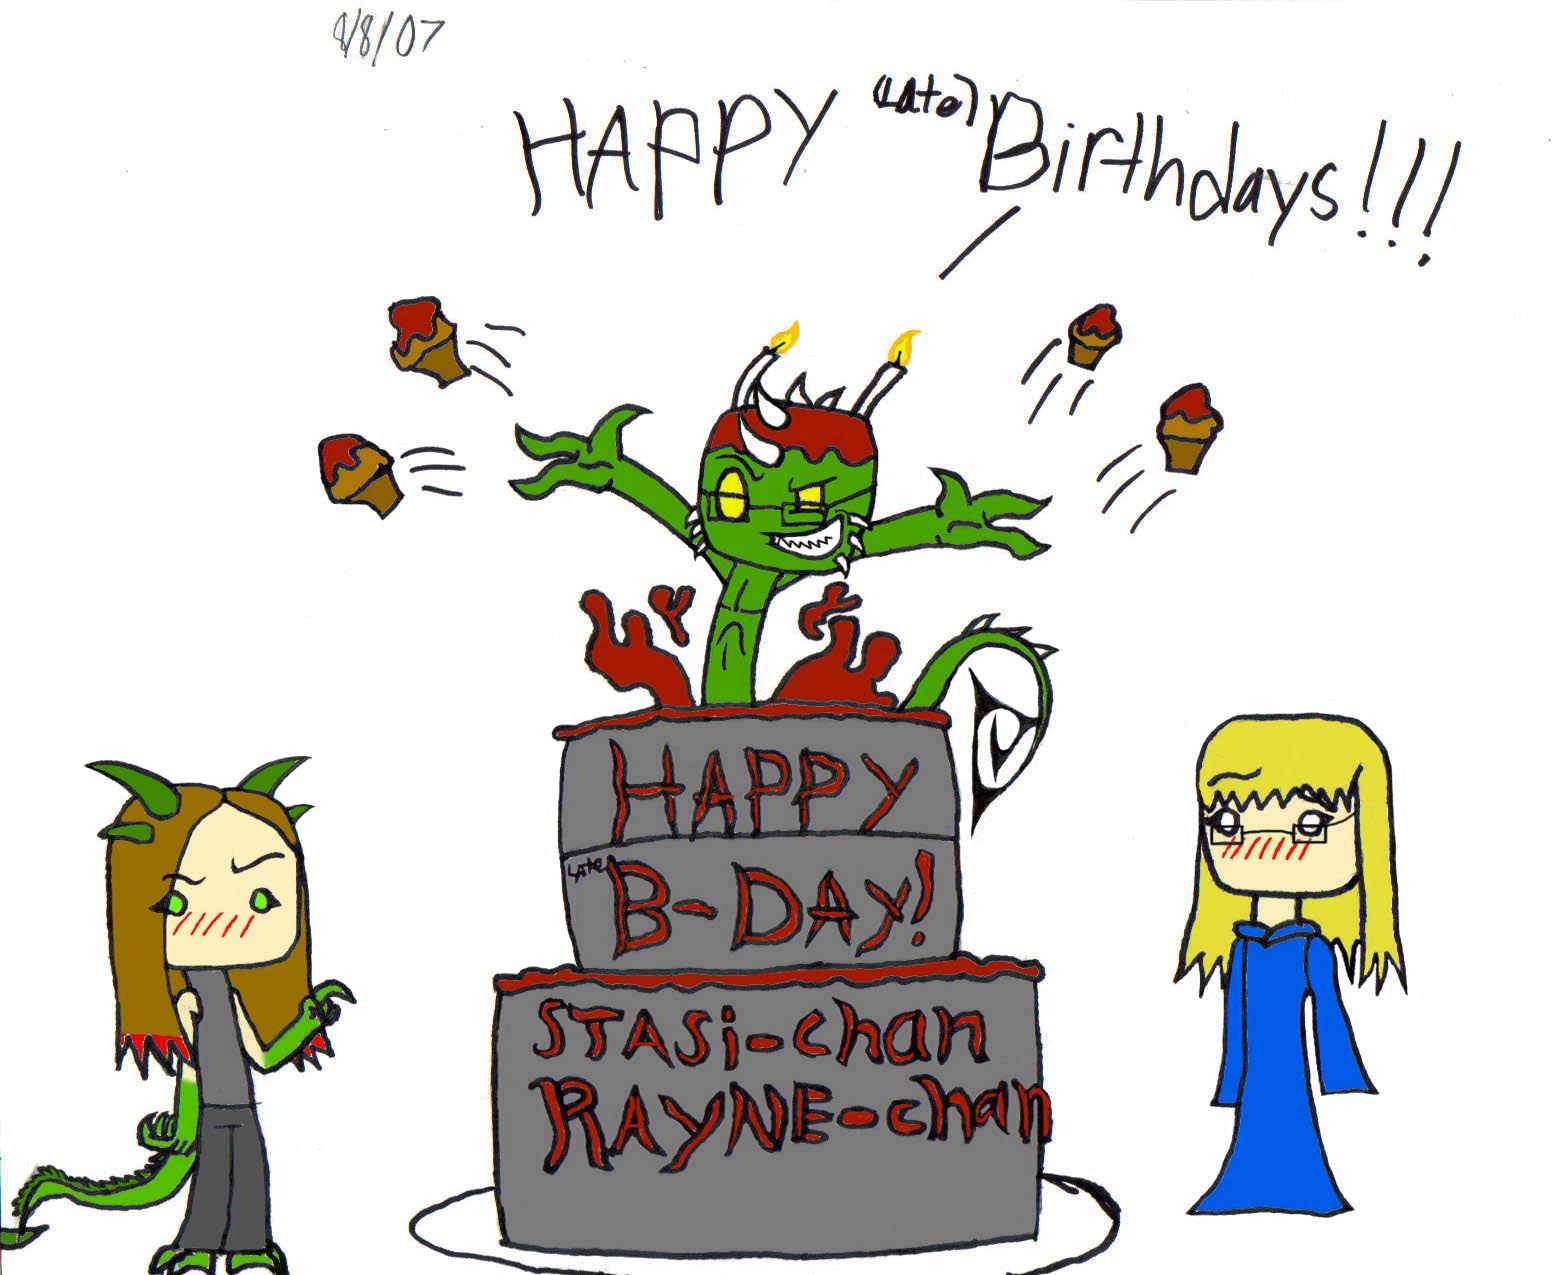 SUPER SUPER LATE B-day pic by Geckon_Lord_of_geckos